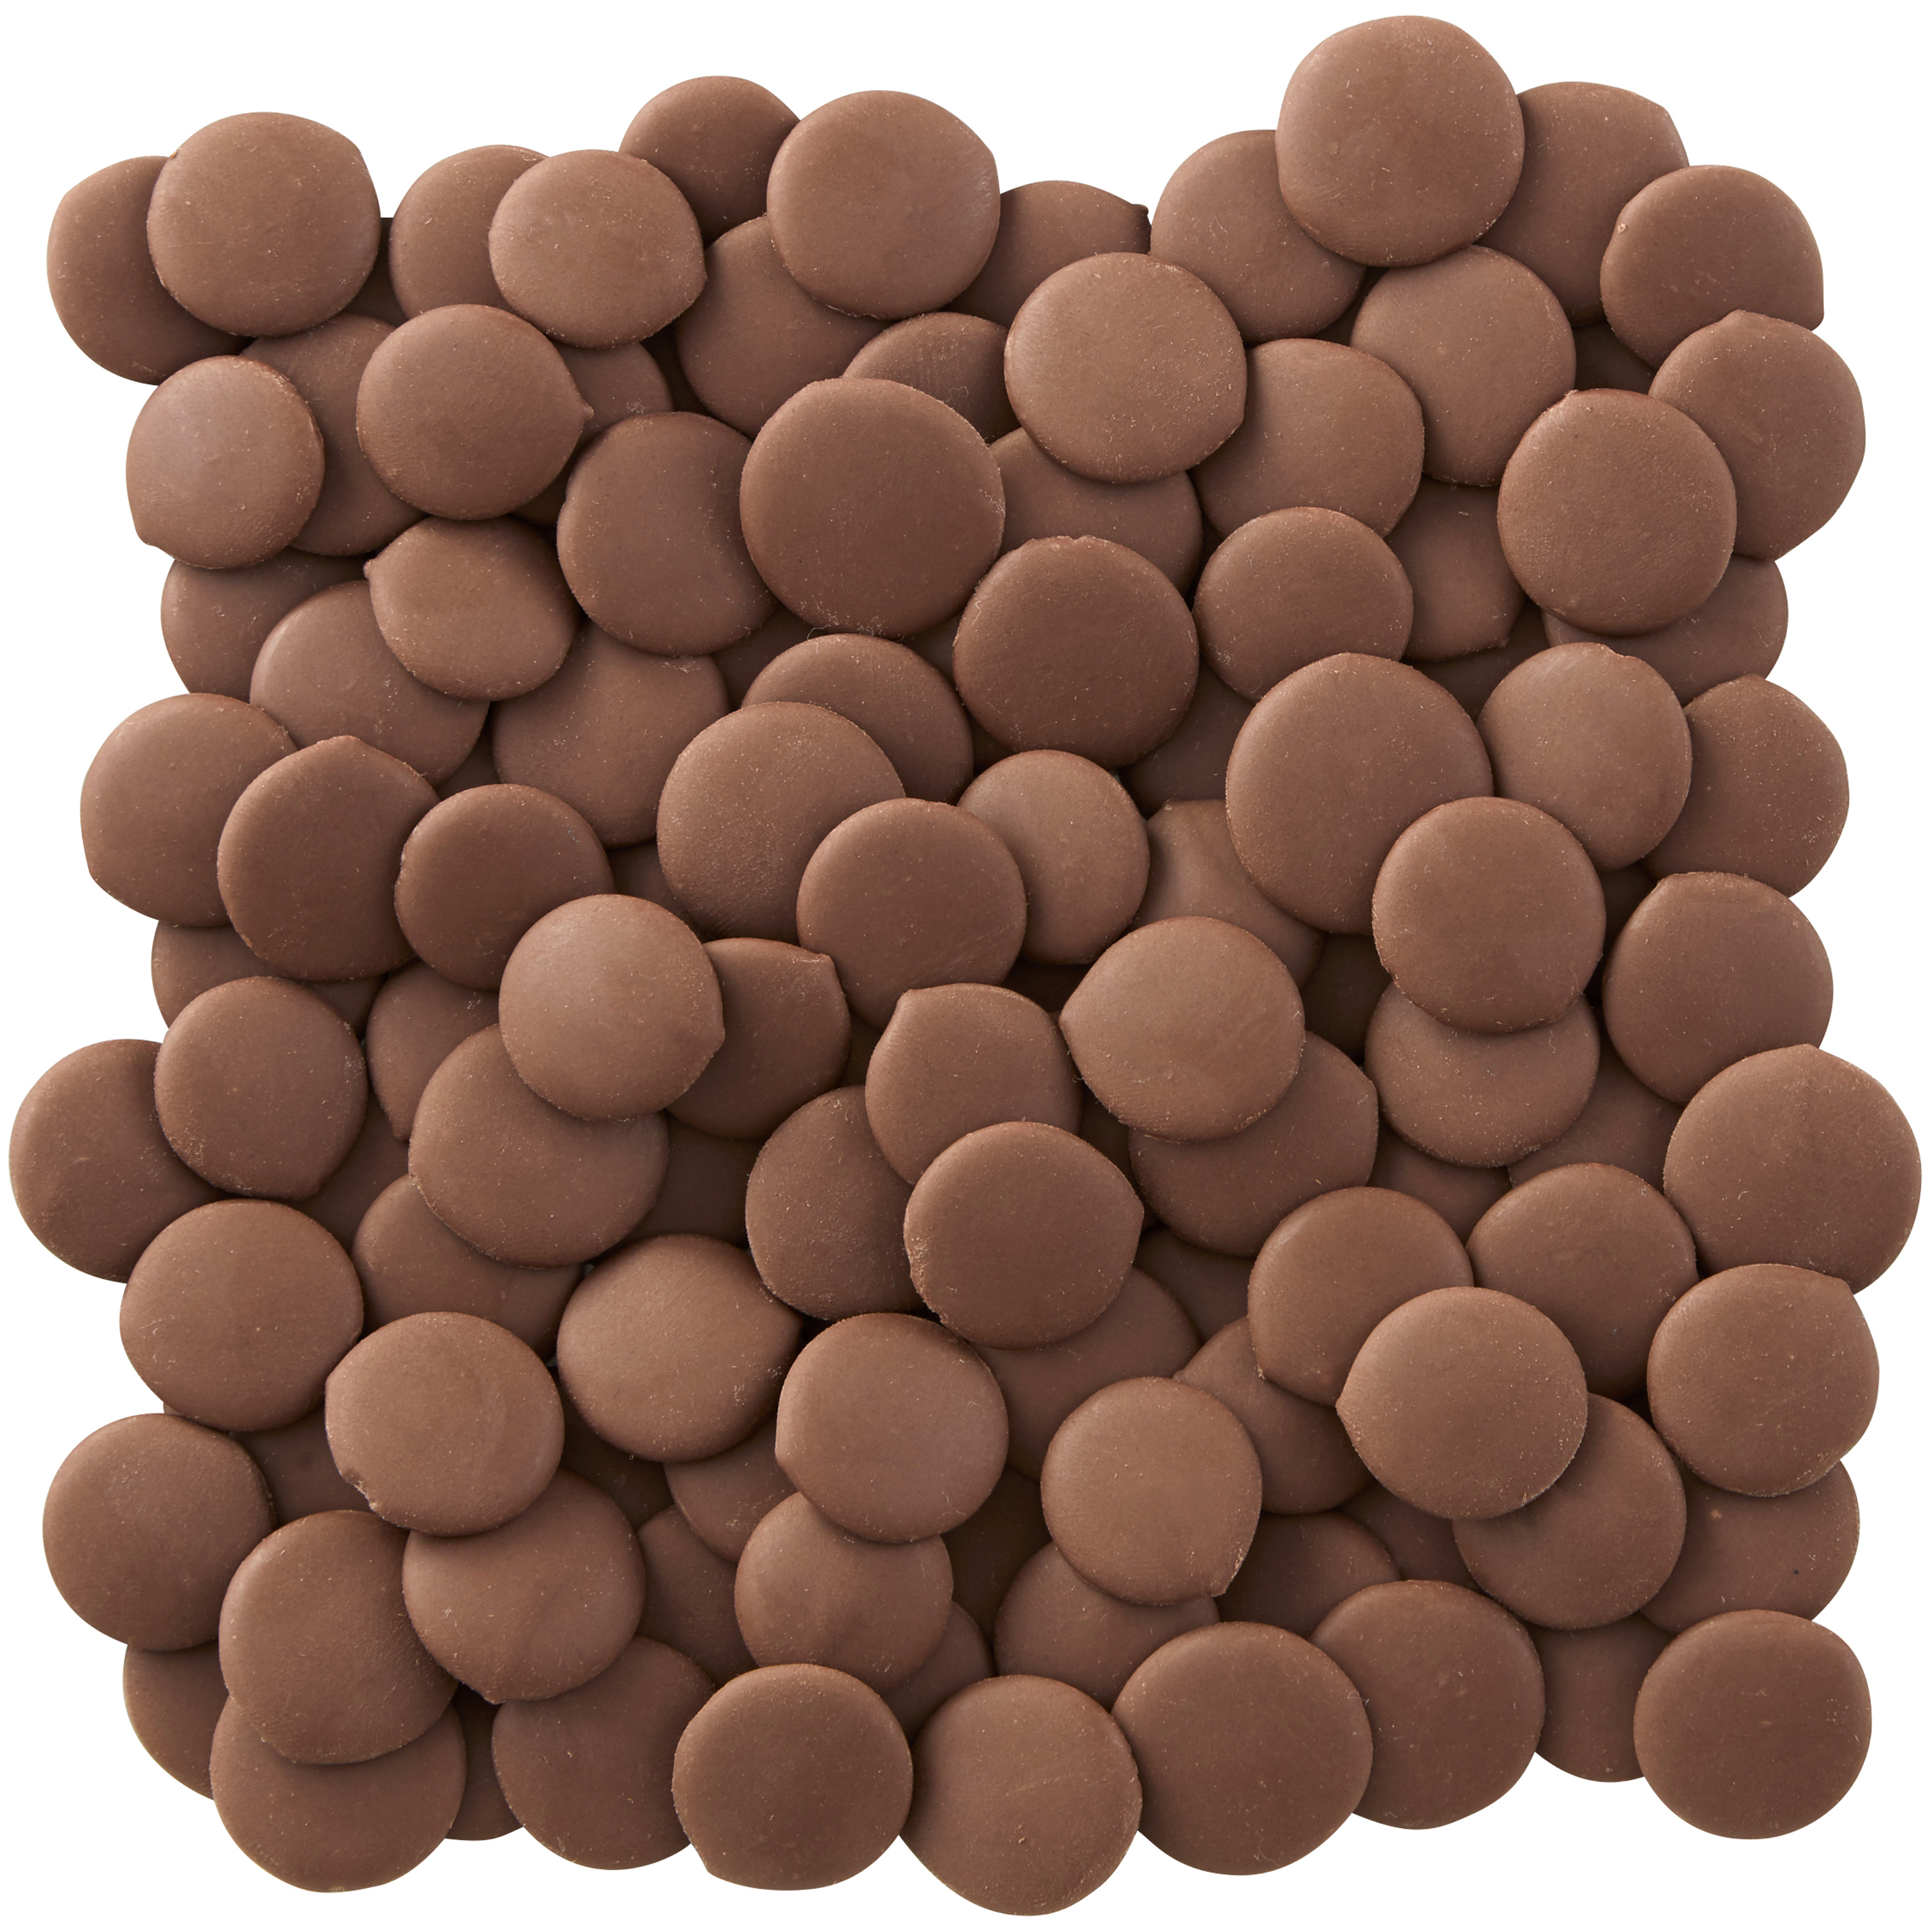 Wilton Light Cocoa Candy Melts, Mini Milk Chocolate Chips for Cake Pops, Cookies and Wafers, 12 oz. - image 3 of 12